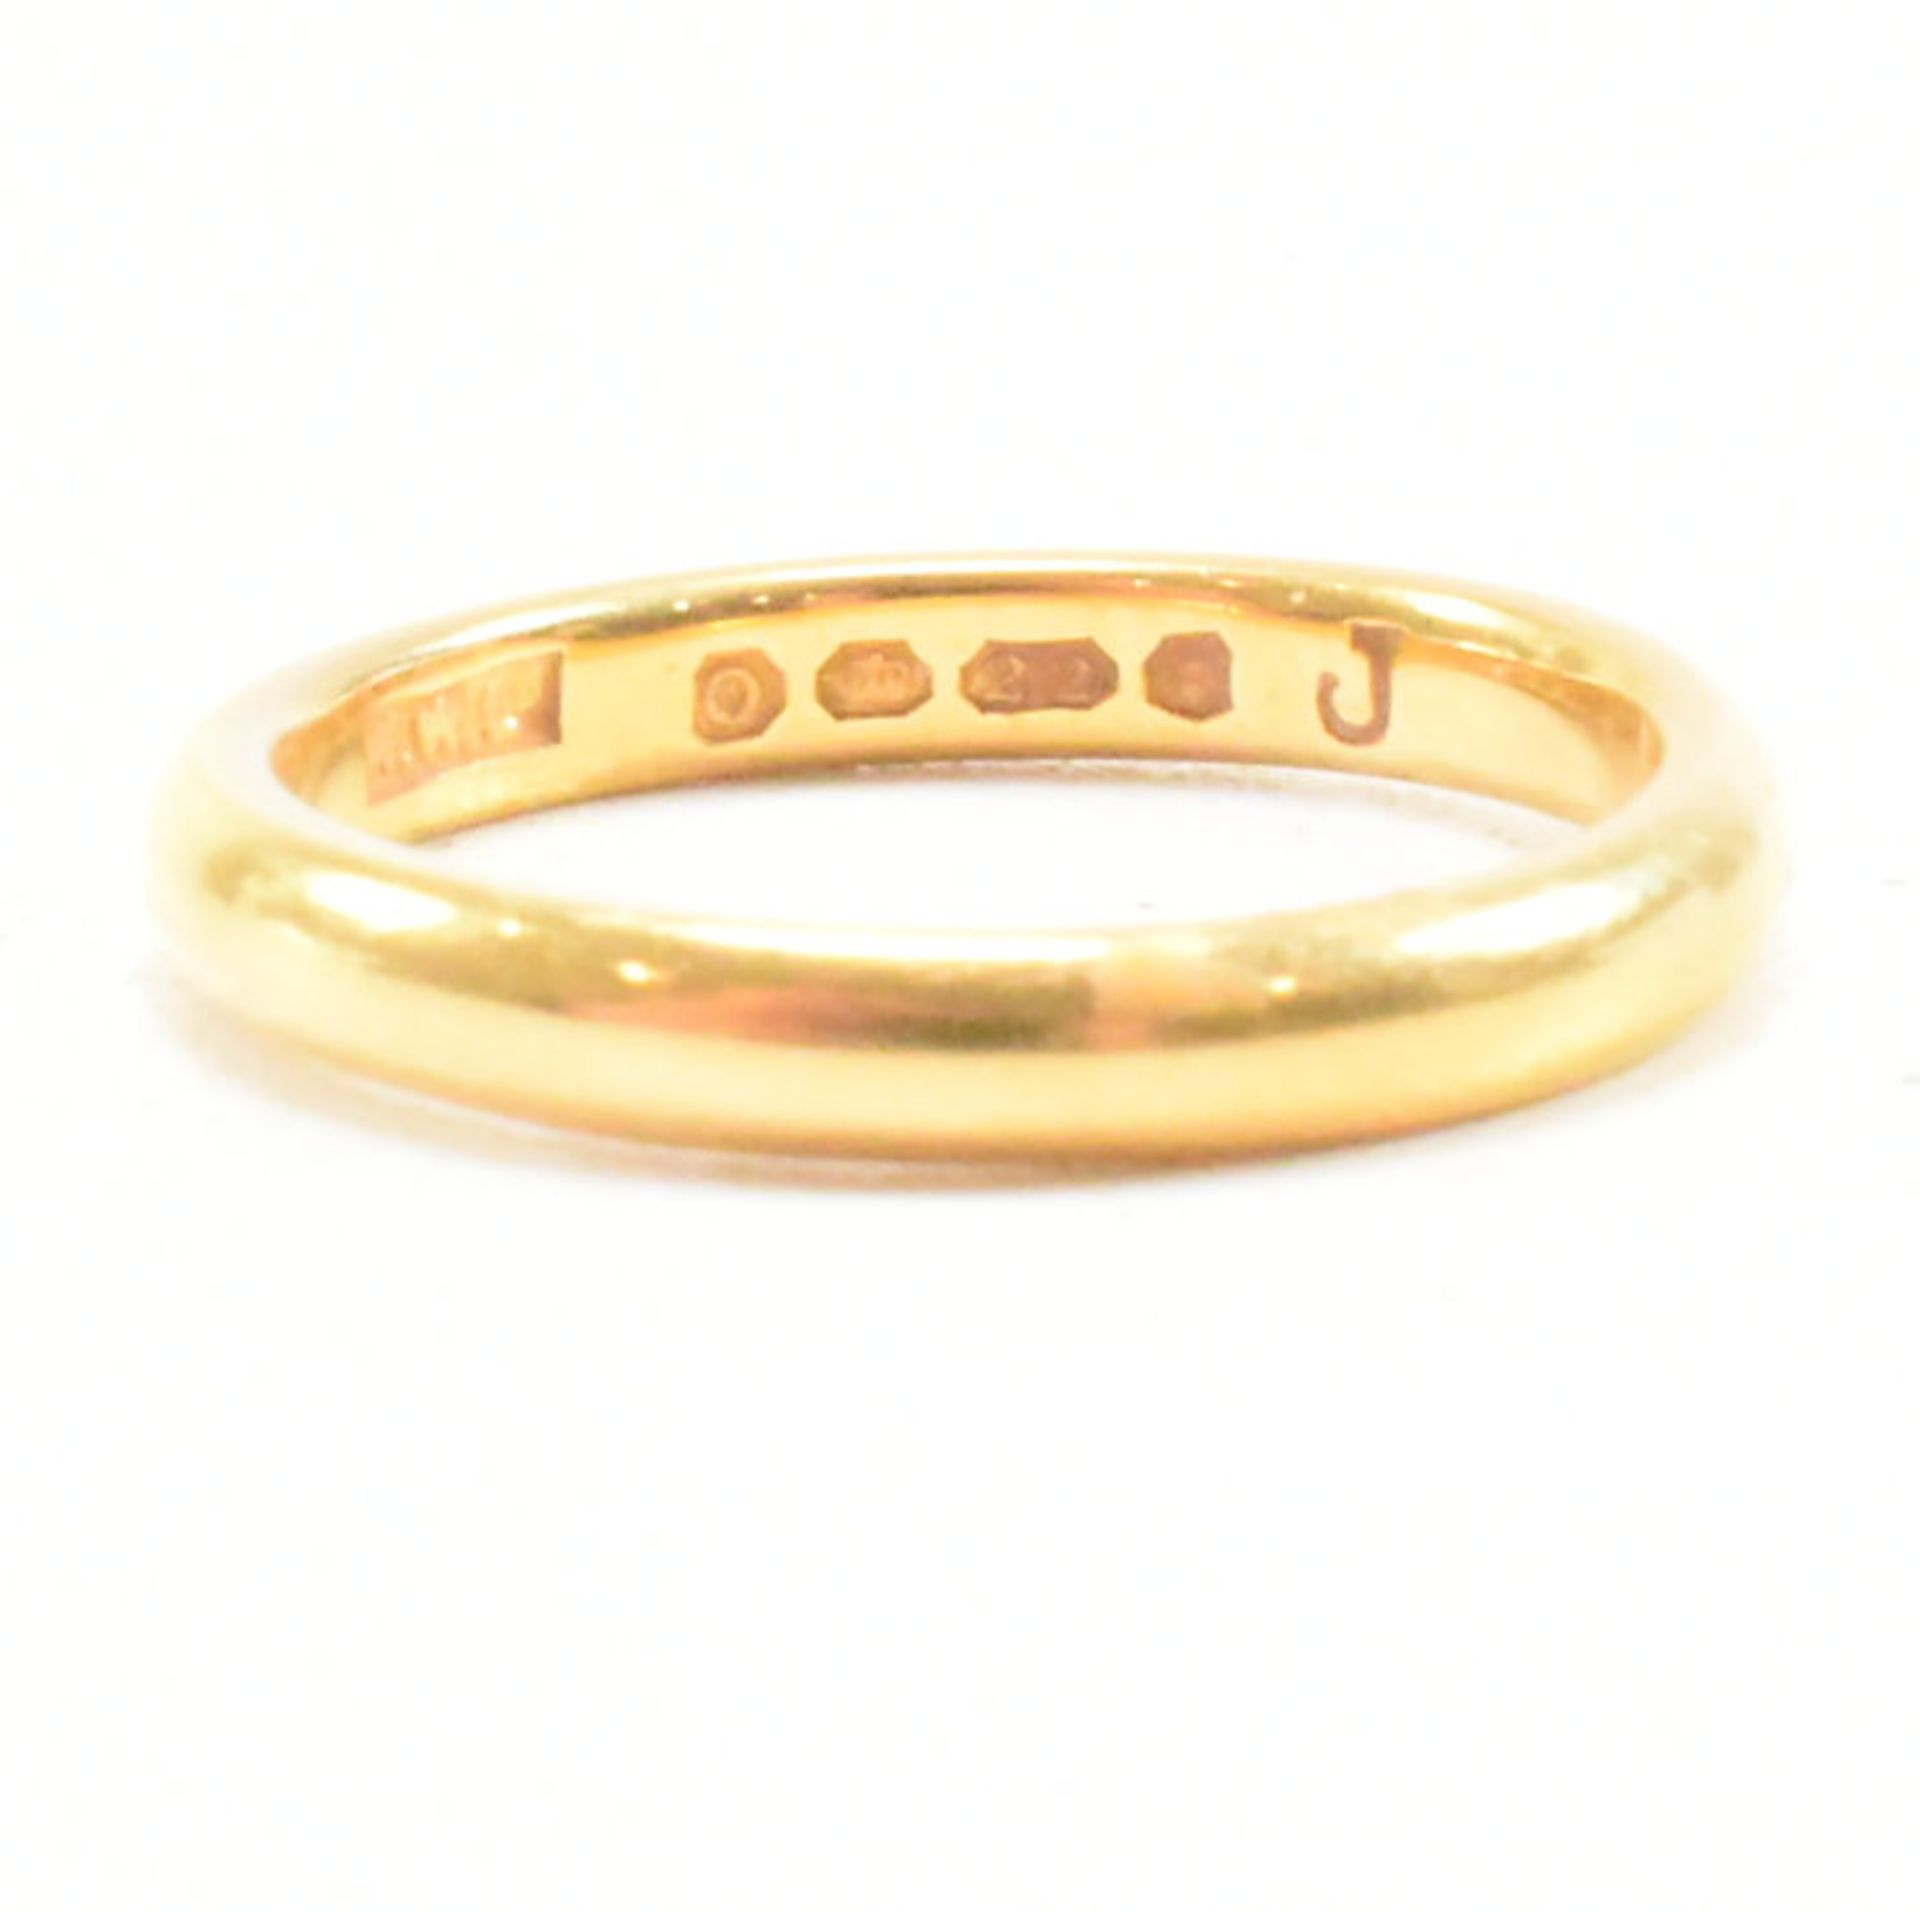 HALLMARKED 22CT GOLD BAND RING - Image 6 of 8